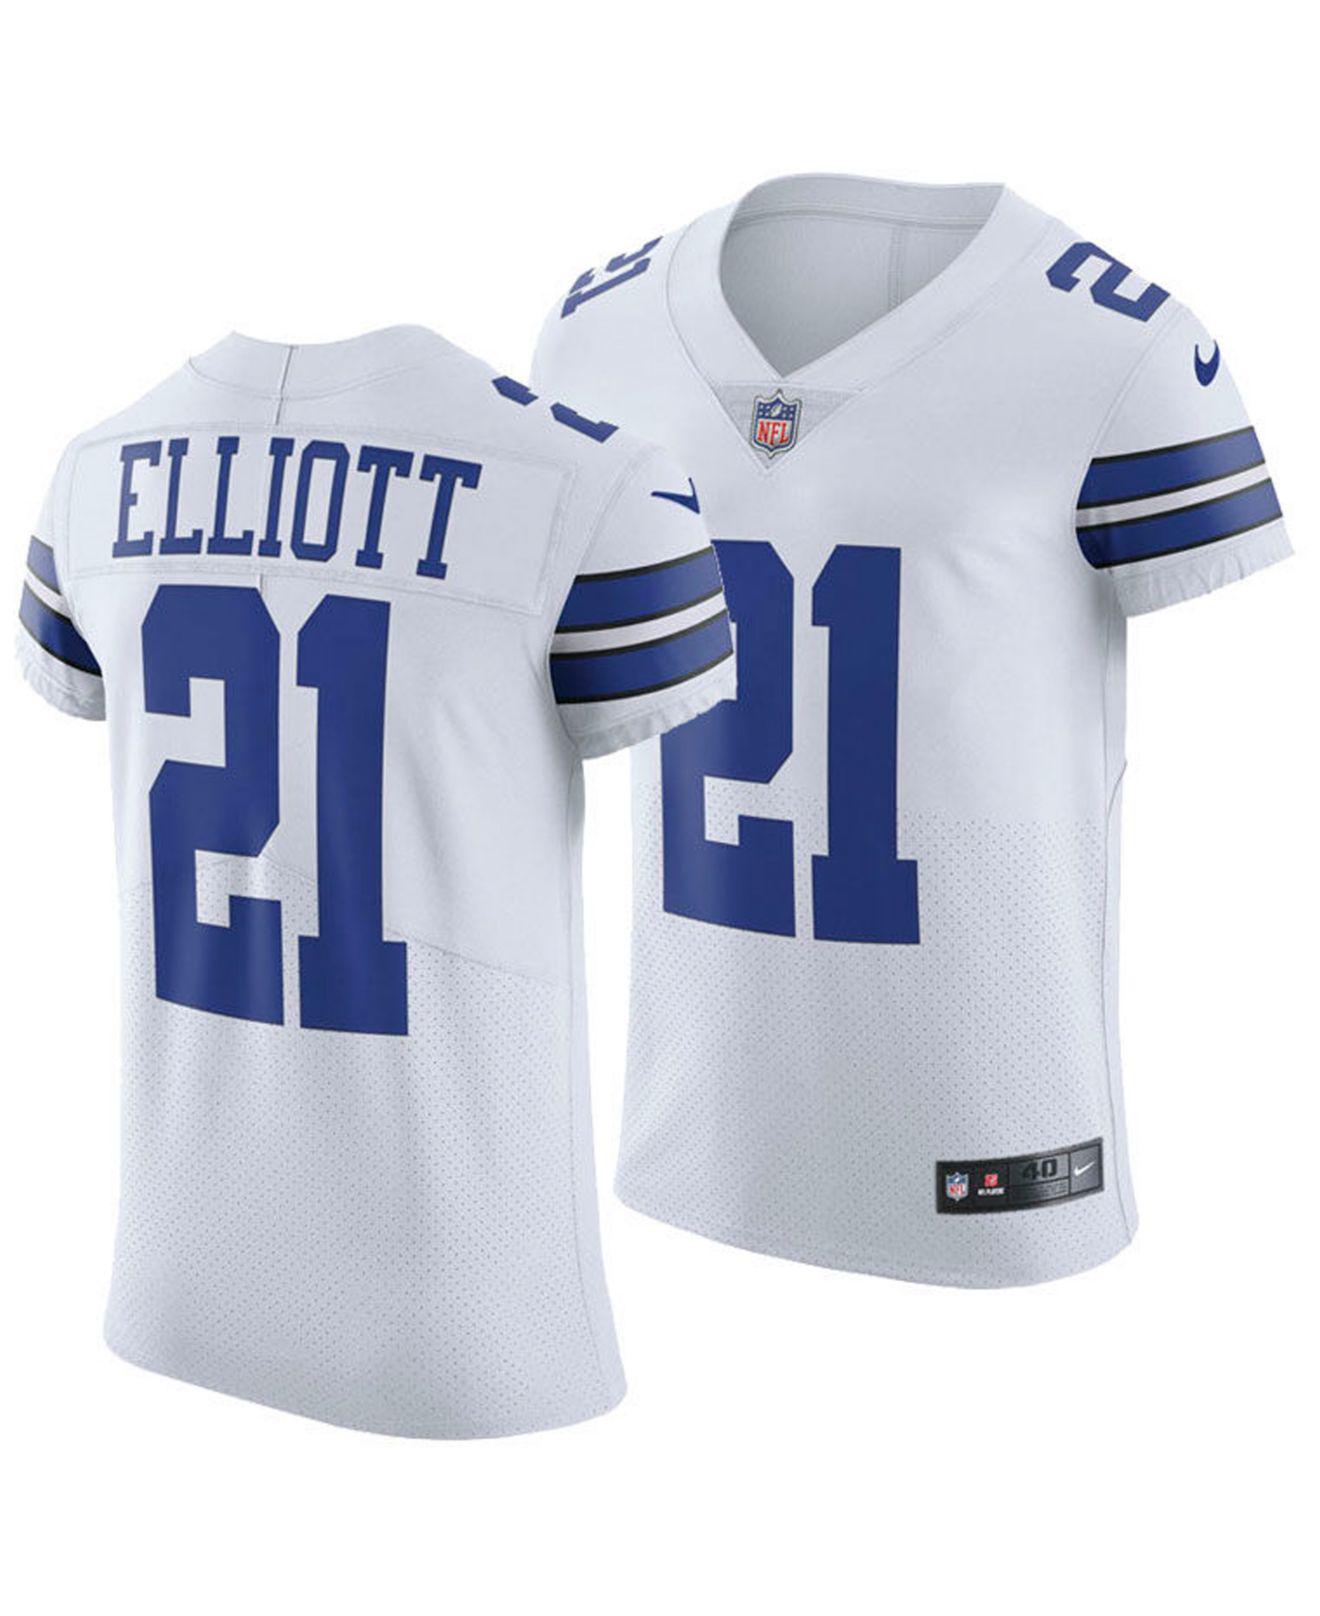 white and pink dallas cowboys jerseys